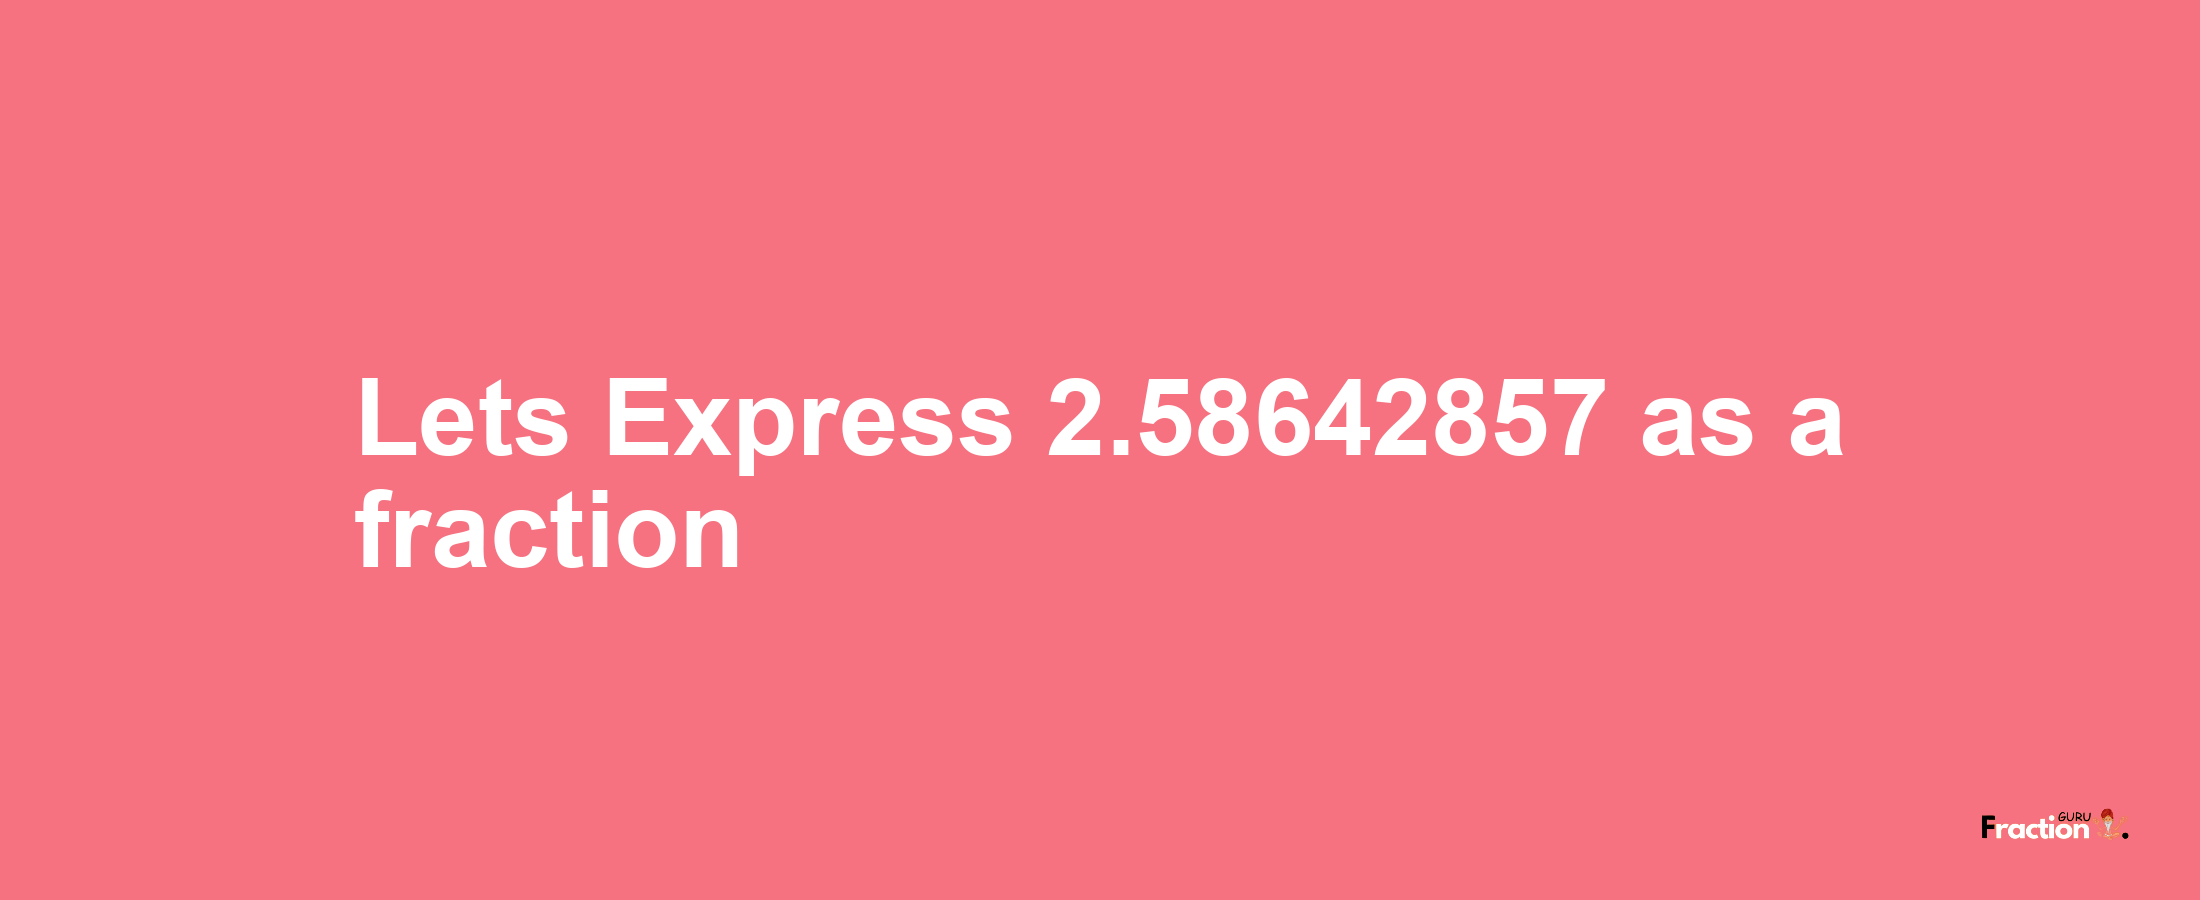 Lets Express 2.58642857 as afraction